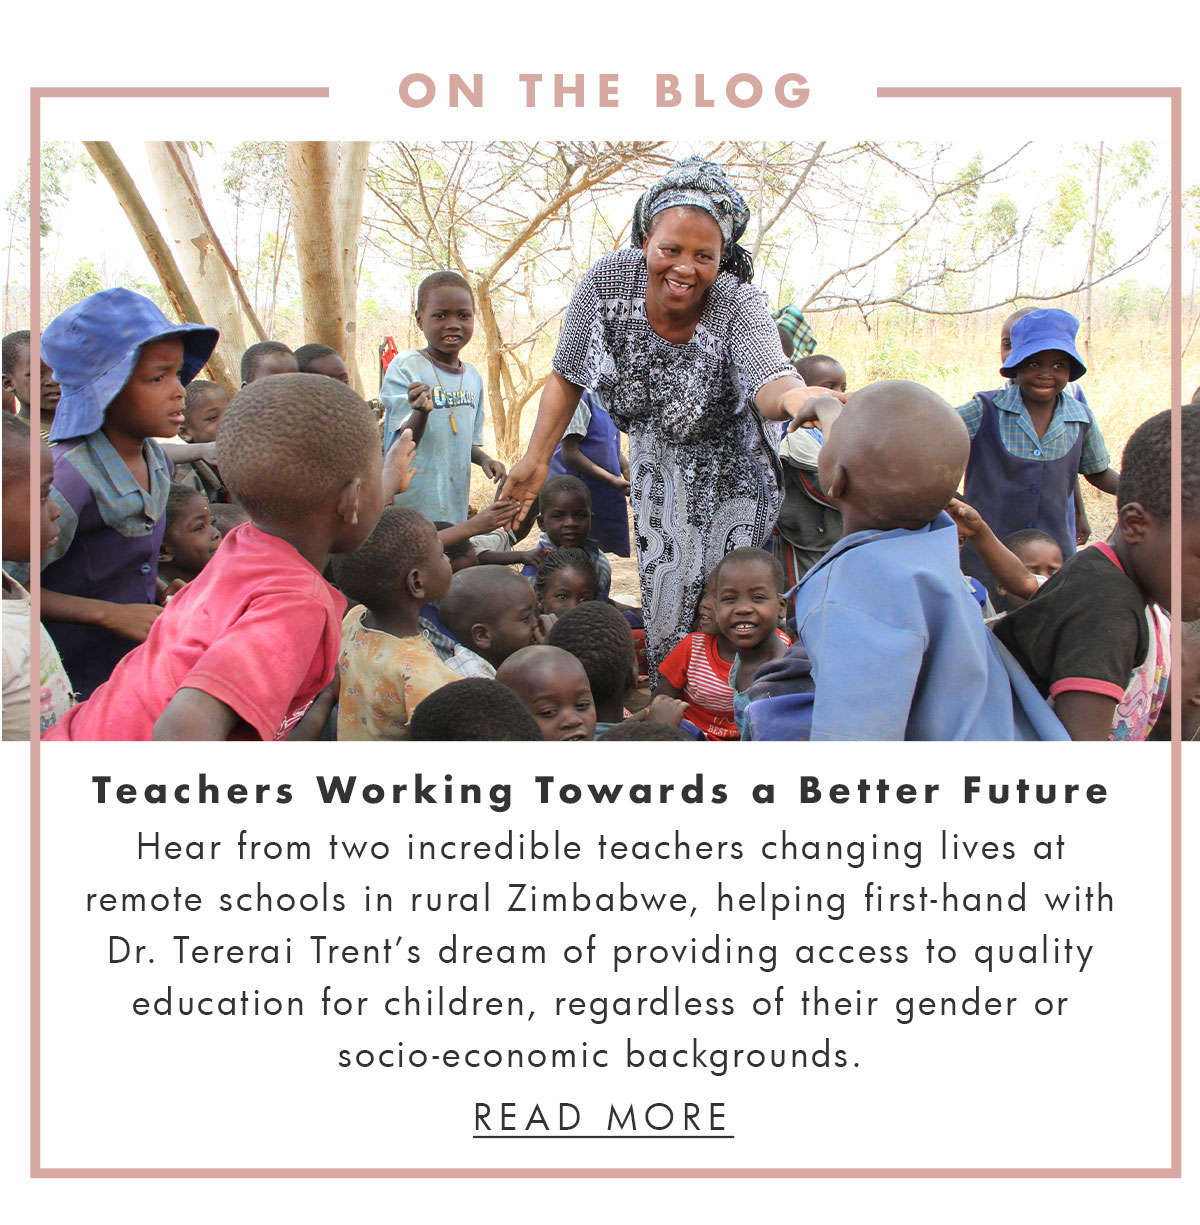 On the blog: Teachers working towards a better future. Read more.